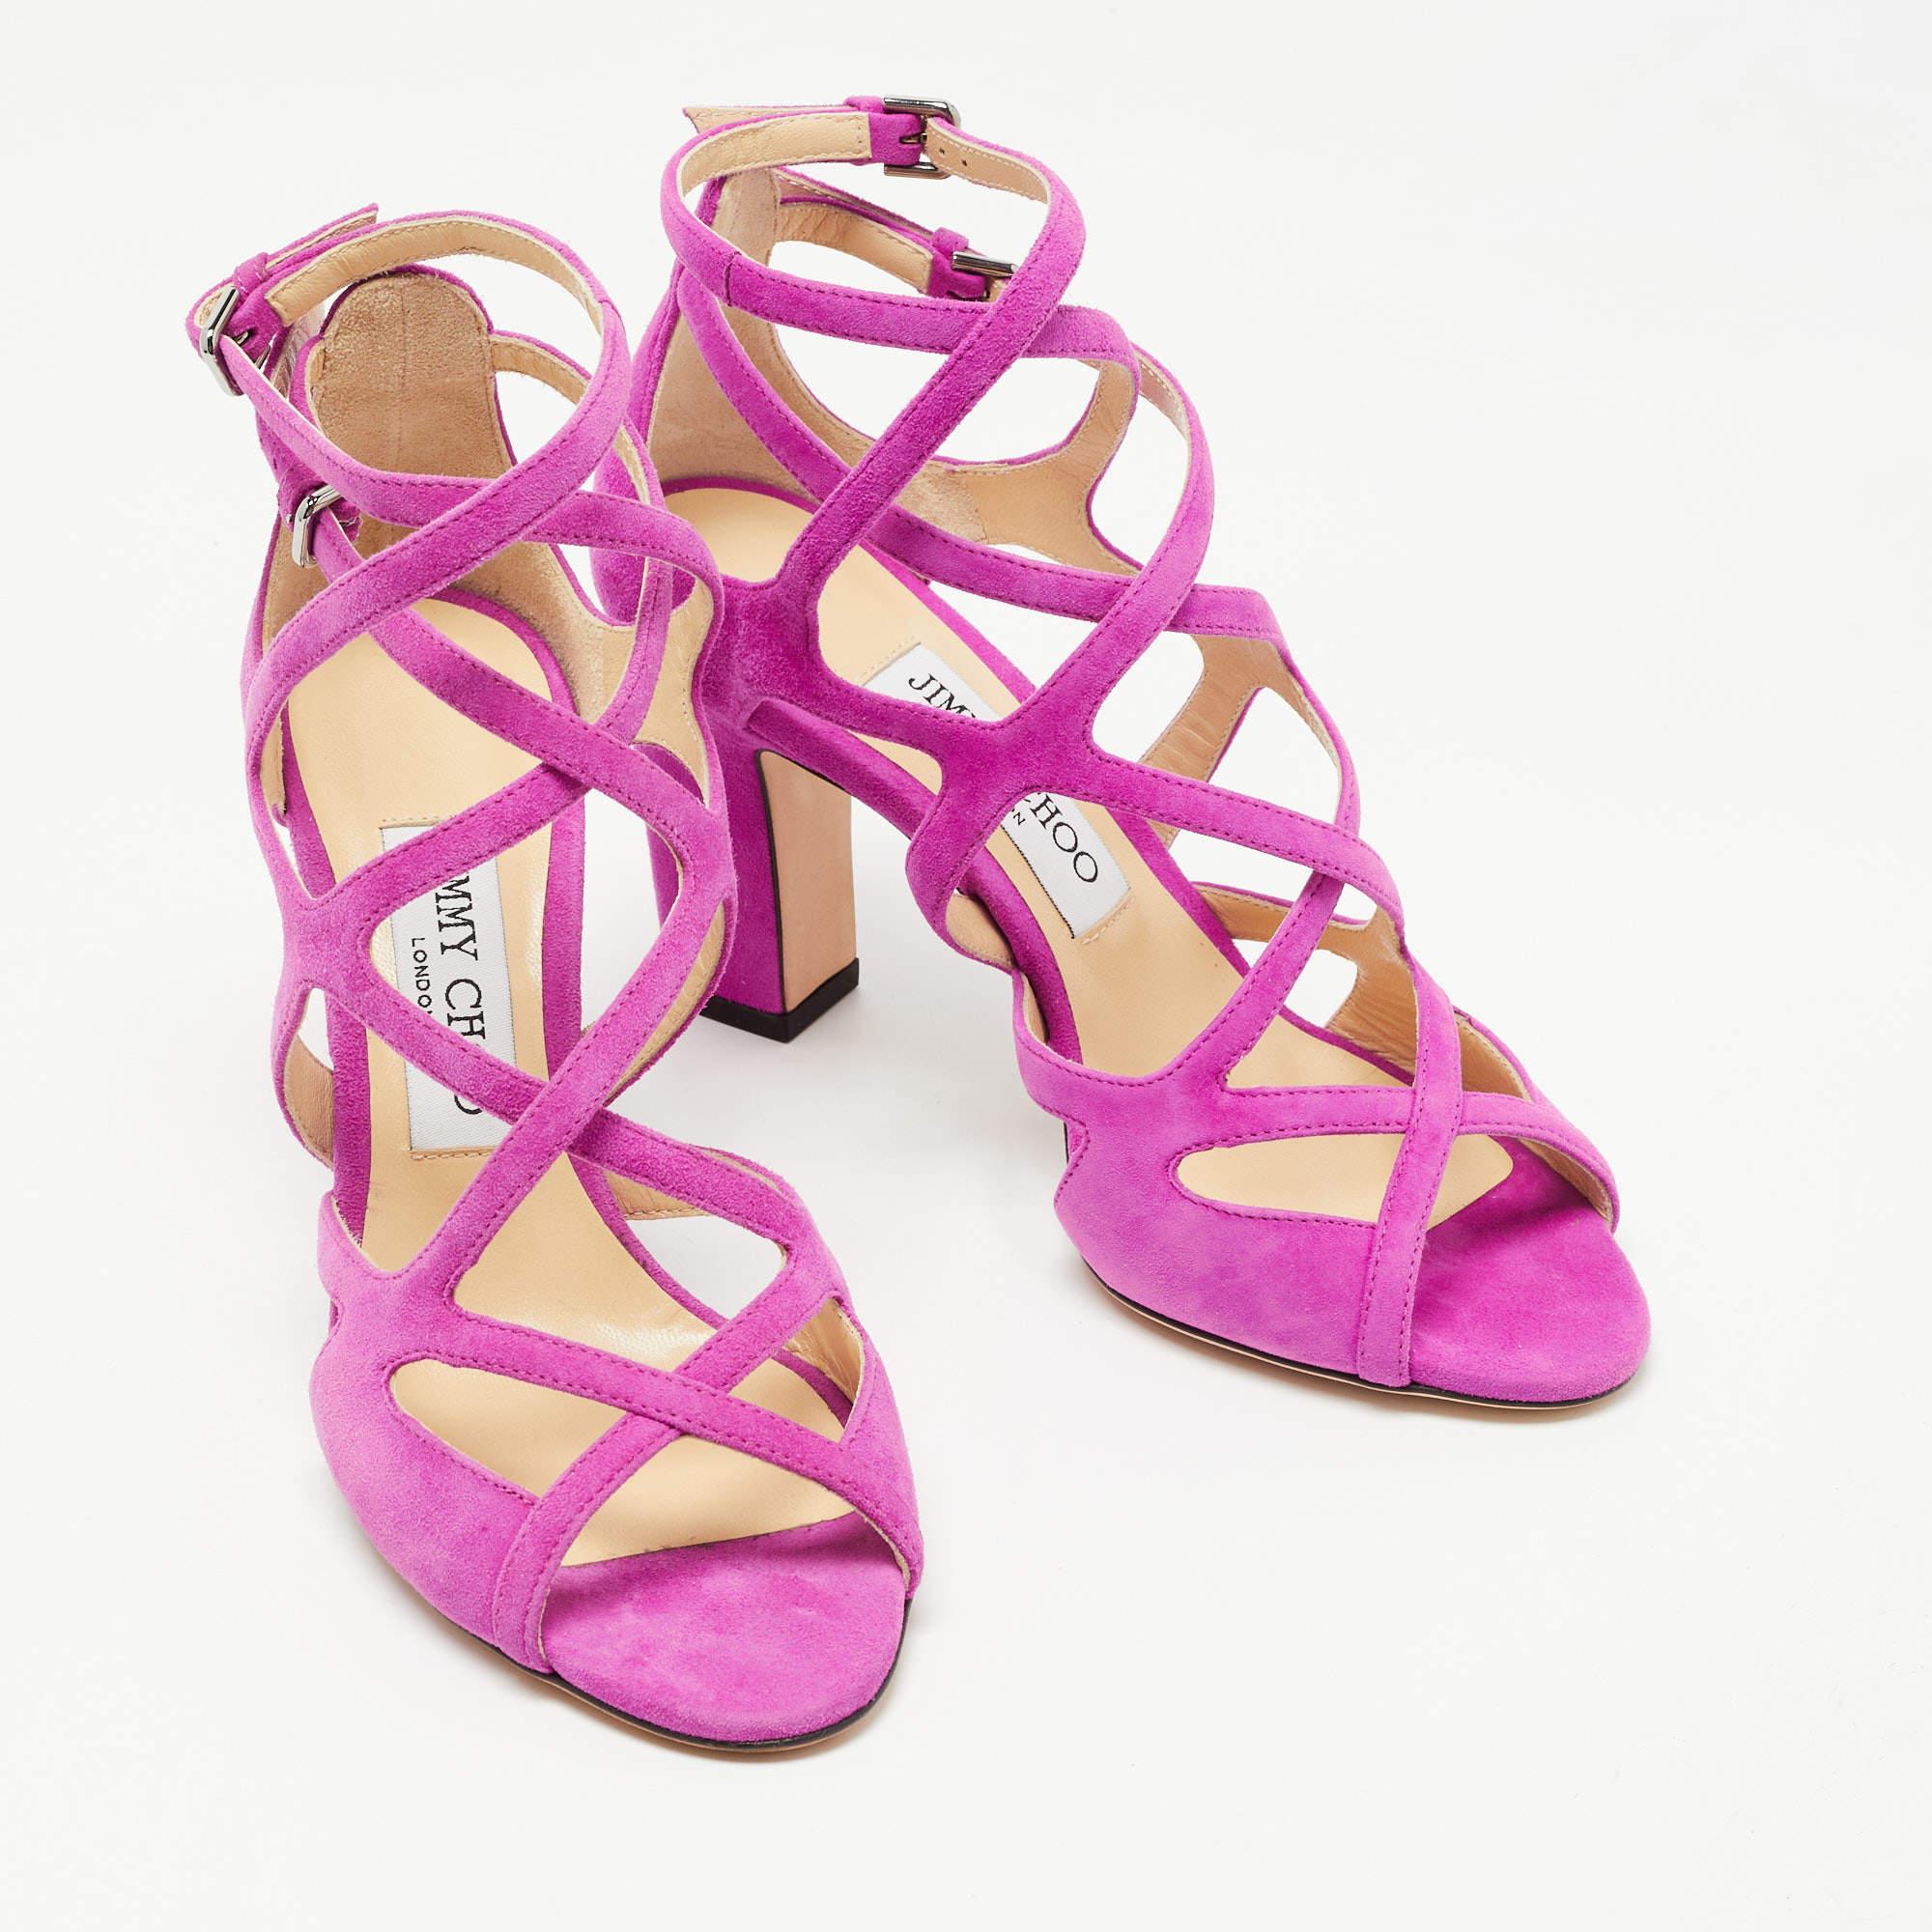 Jimmy Choo Purple Suede Dillan Caged Ankle Strap Sandals Size 36 1